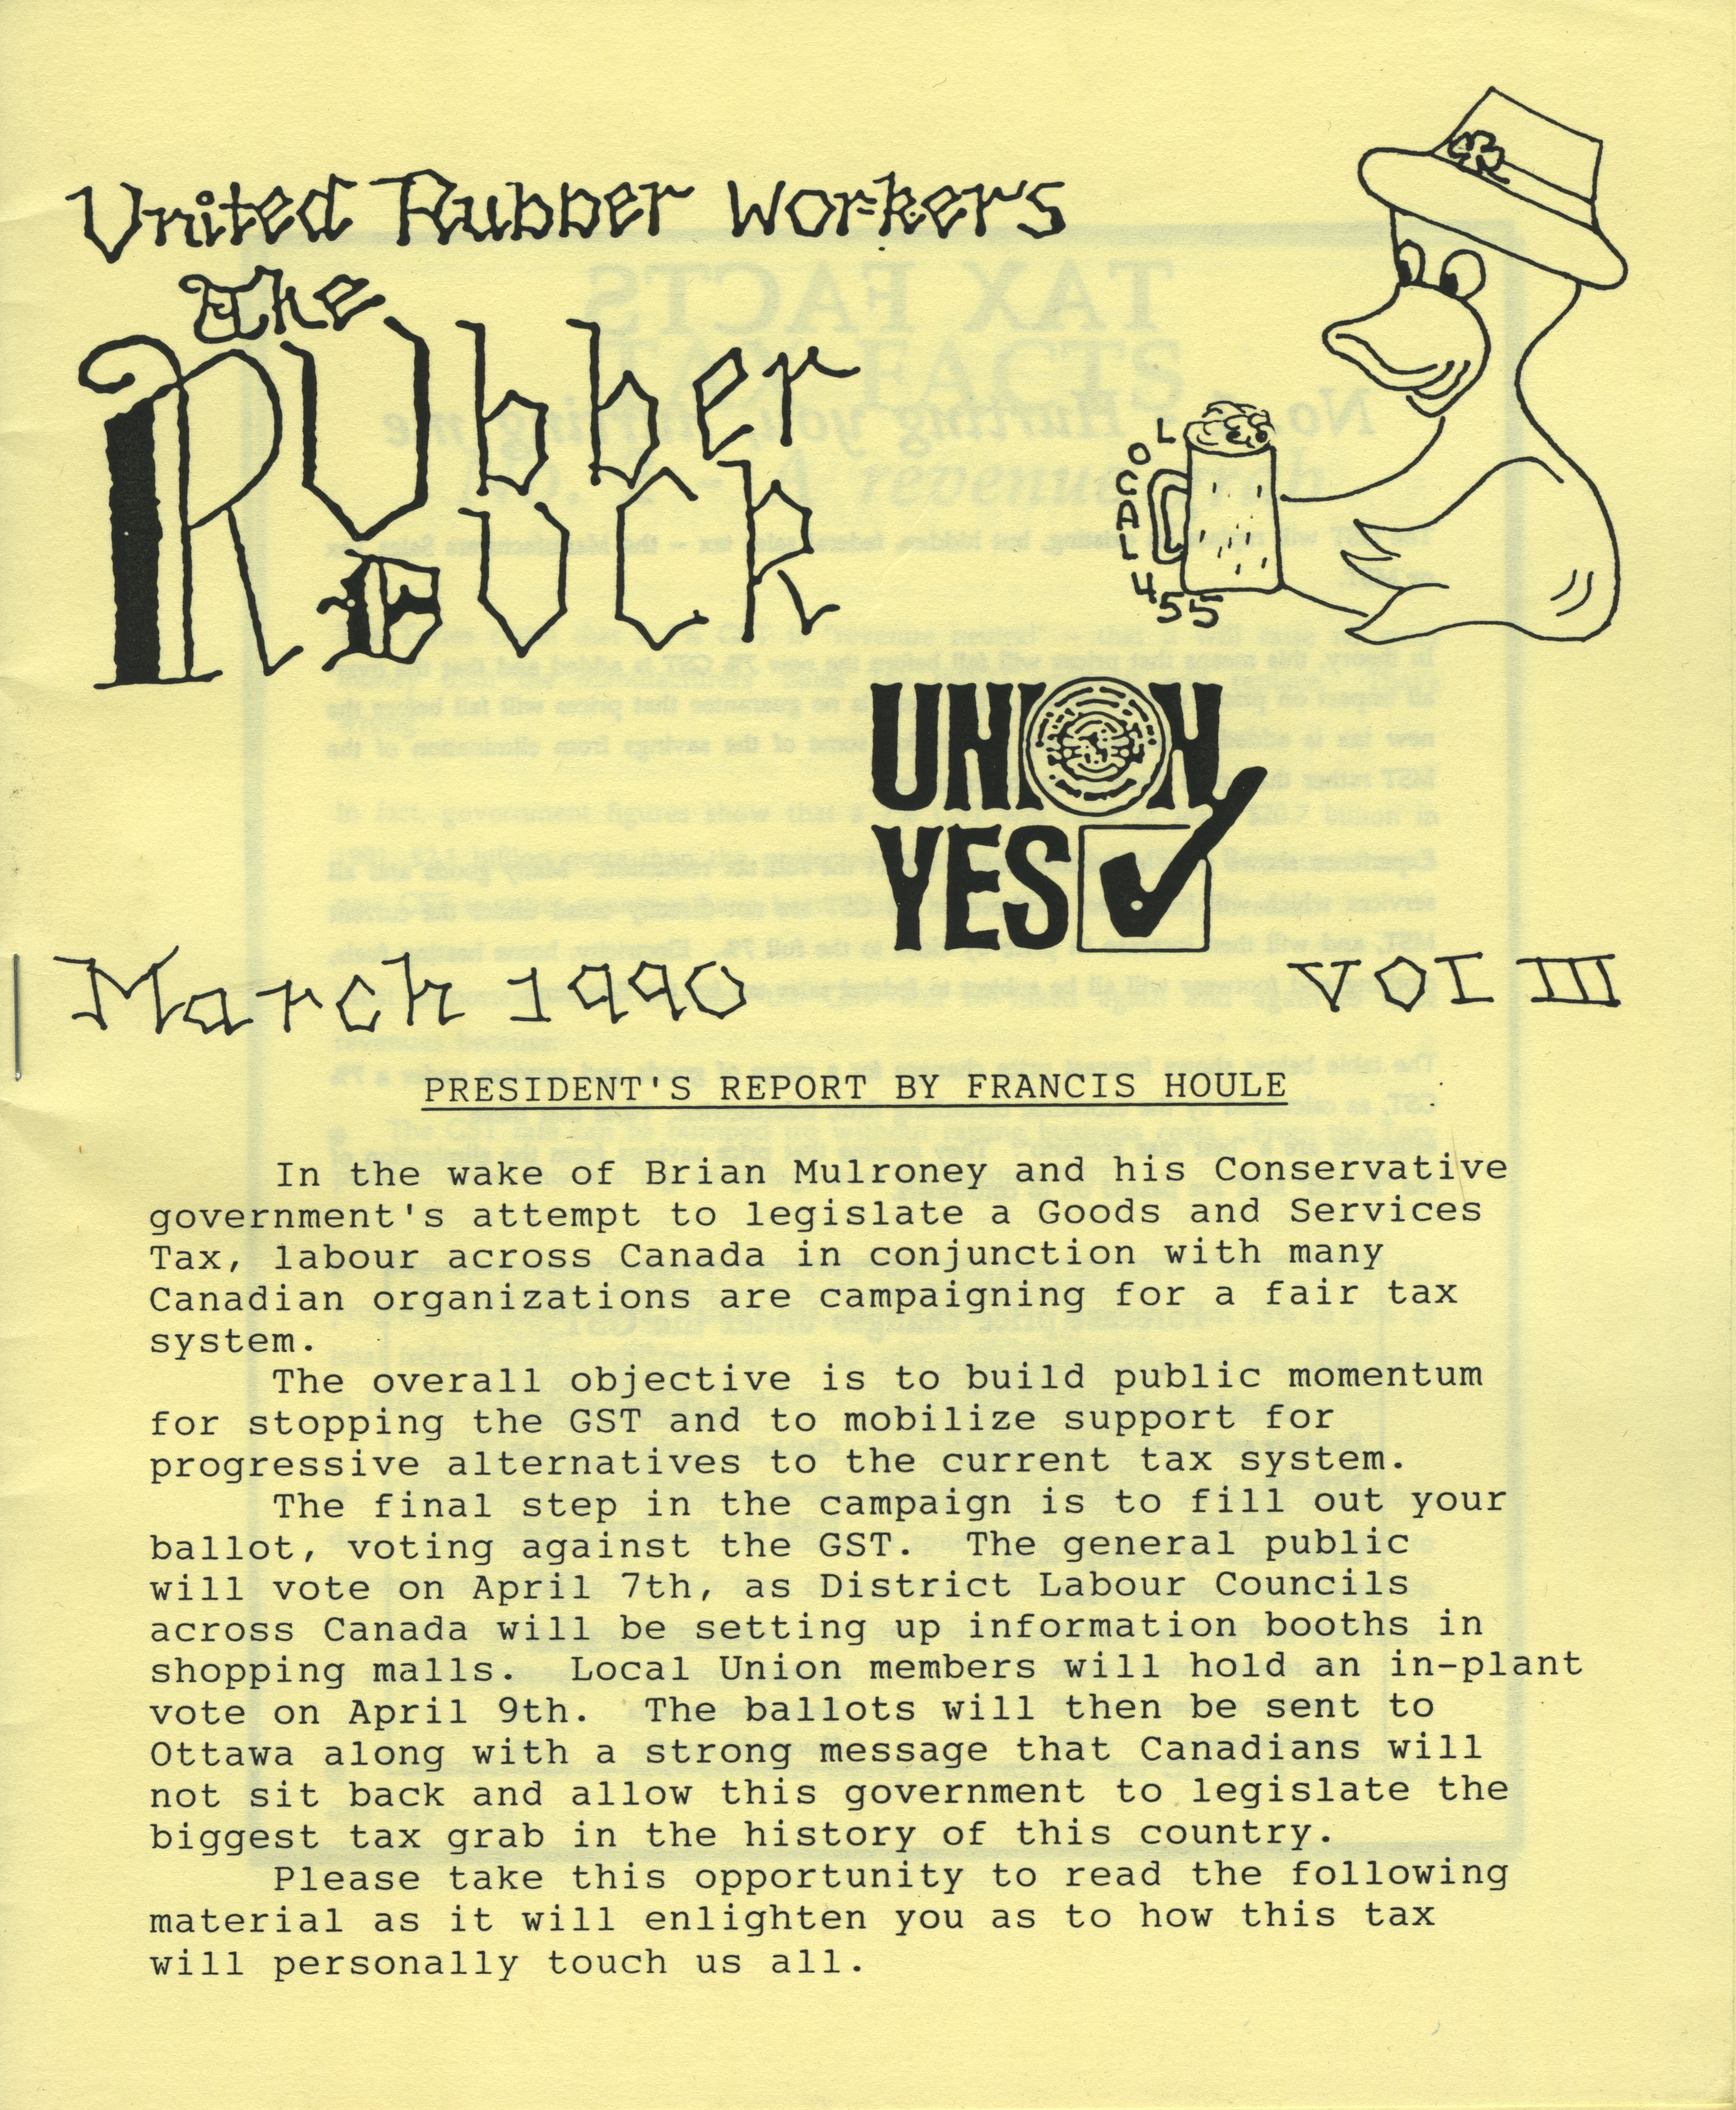 President's report by Francis Houle. Titled "United rubber worker's the Rubber Duck". 